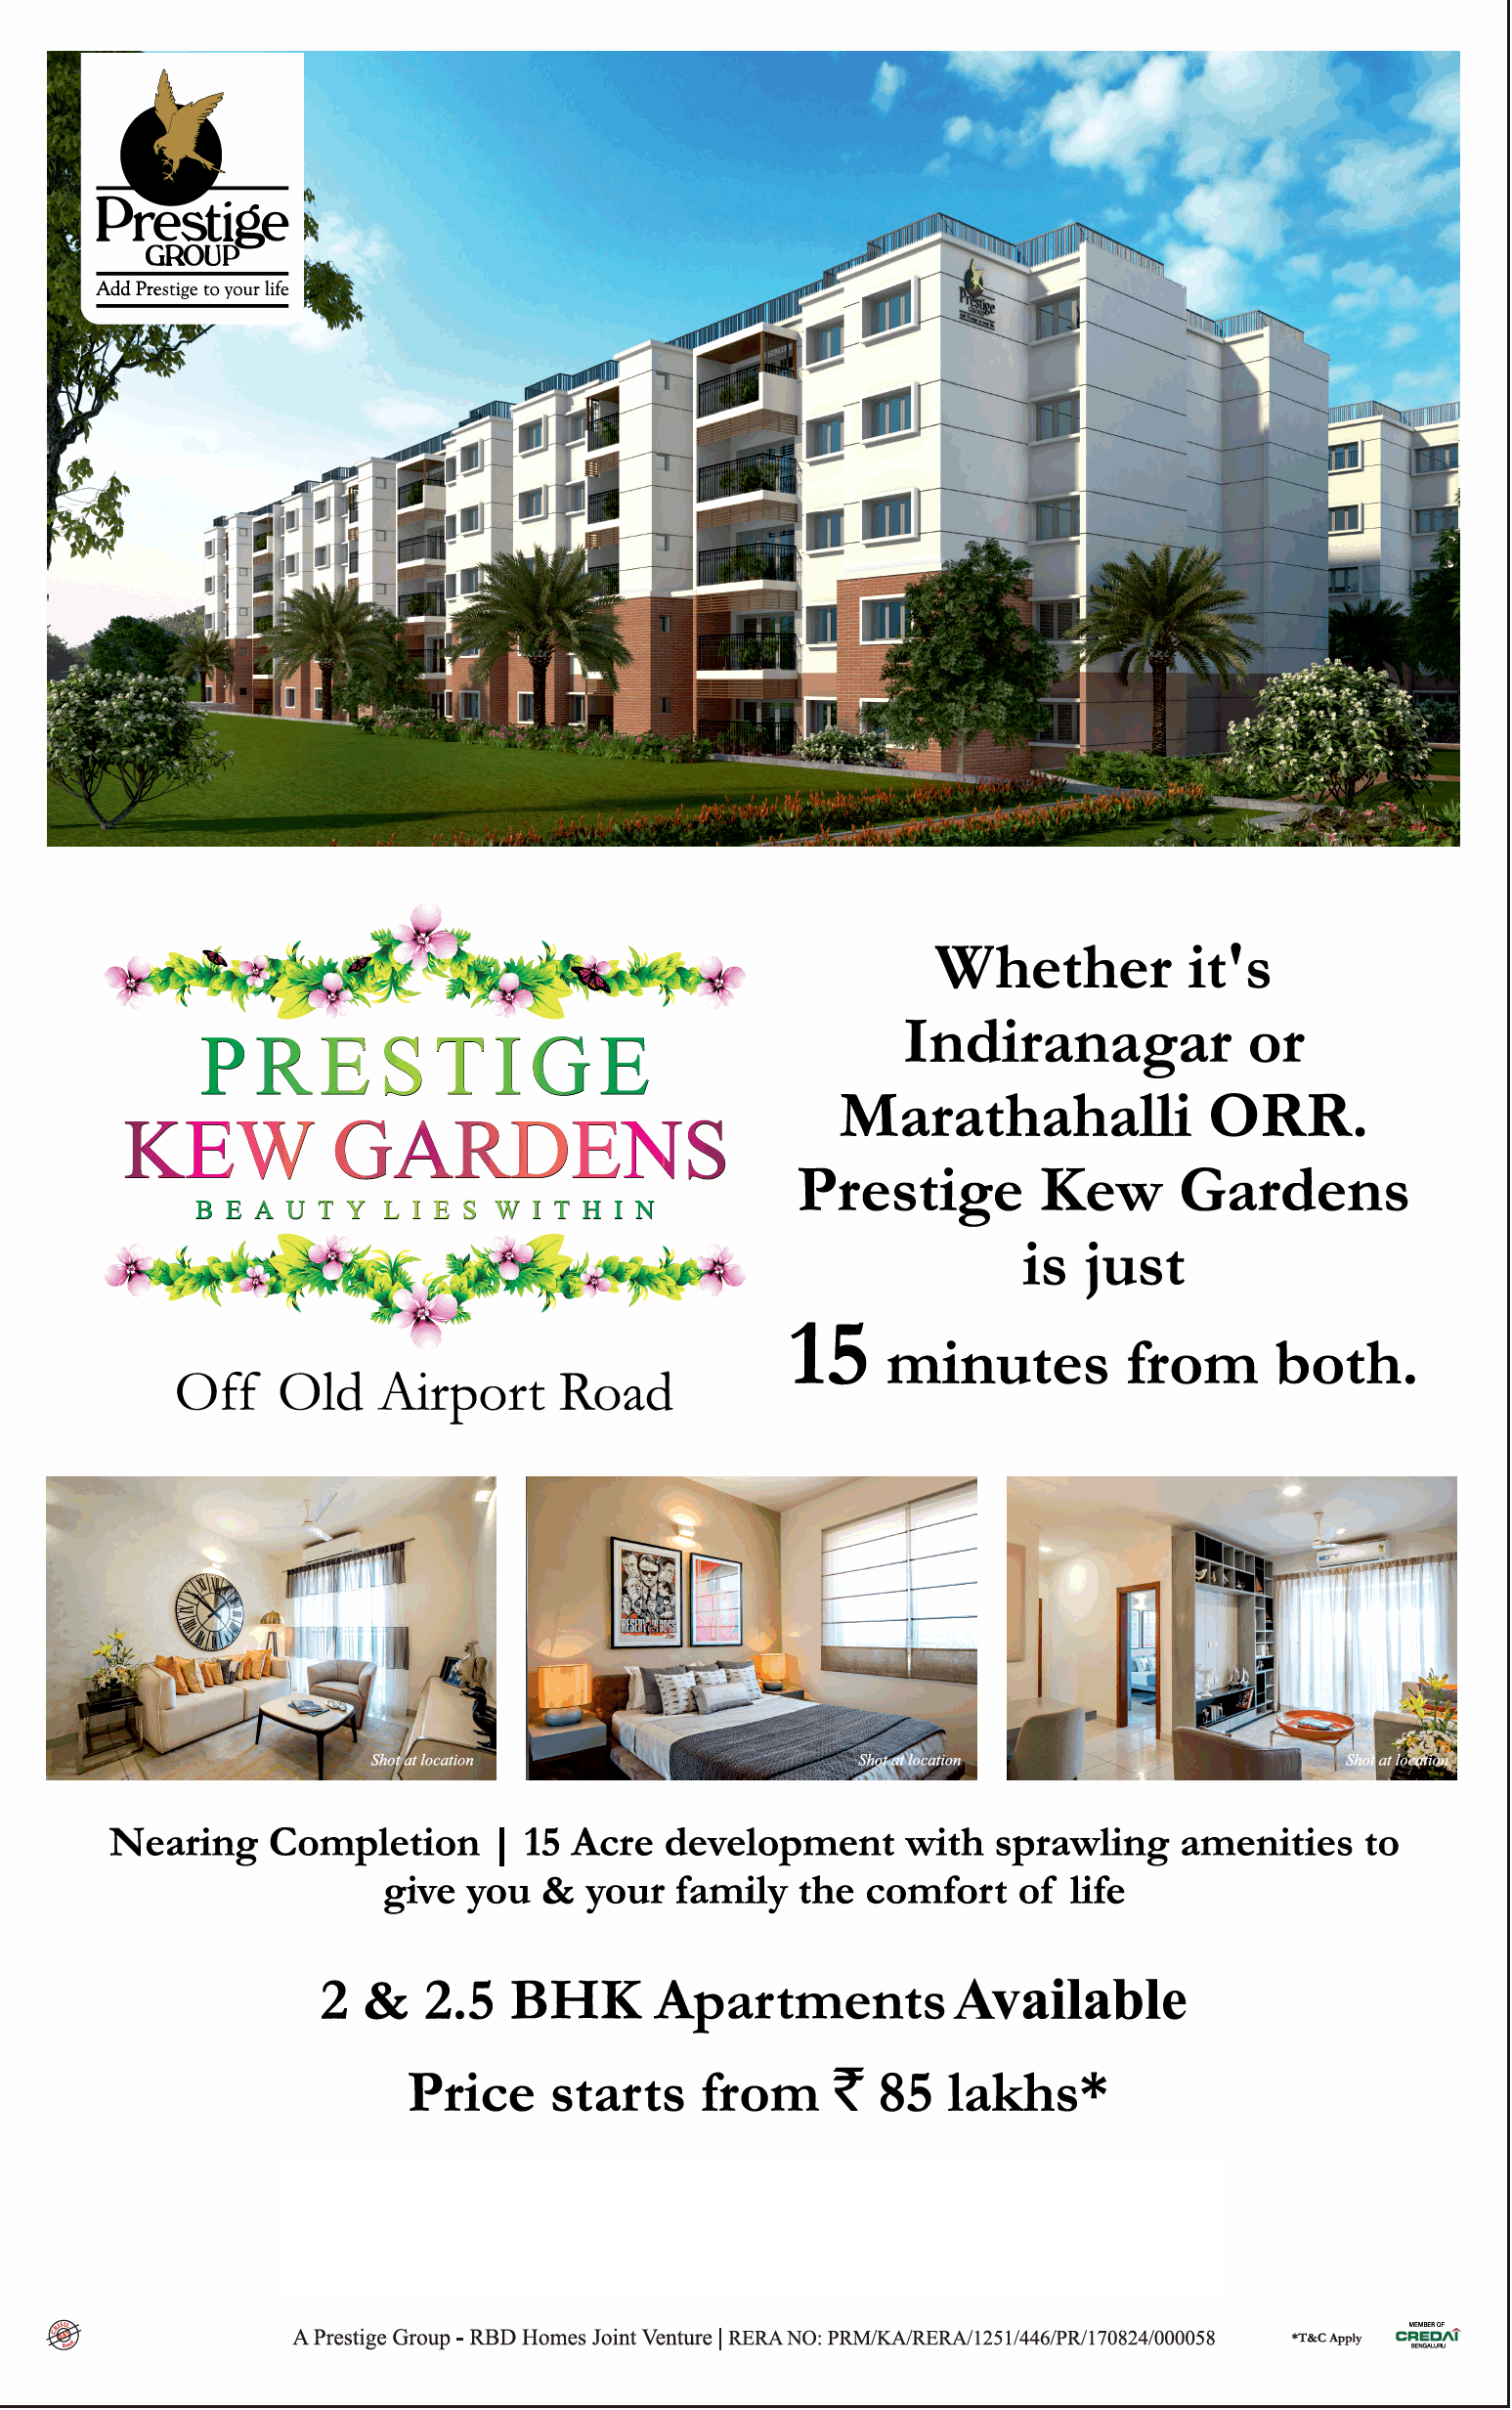 Prestige Kew Gardens 2 & 2.5 BHK Apartments Available Price starts from Rs 85 lakhs in Bangalore